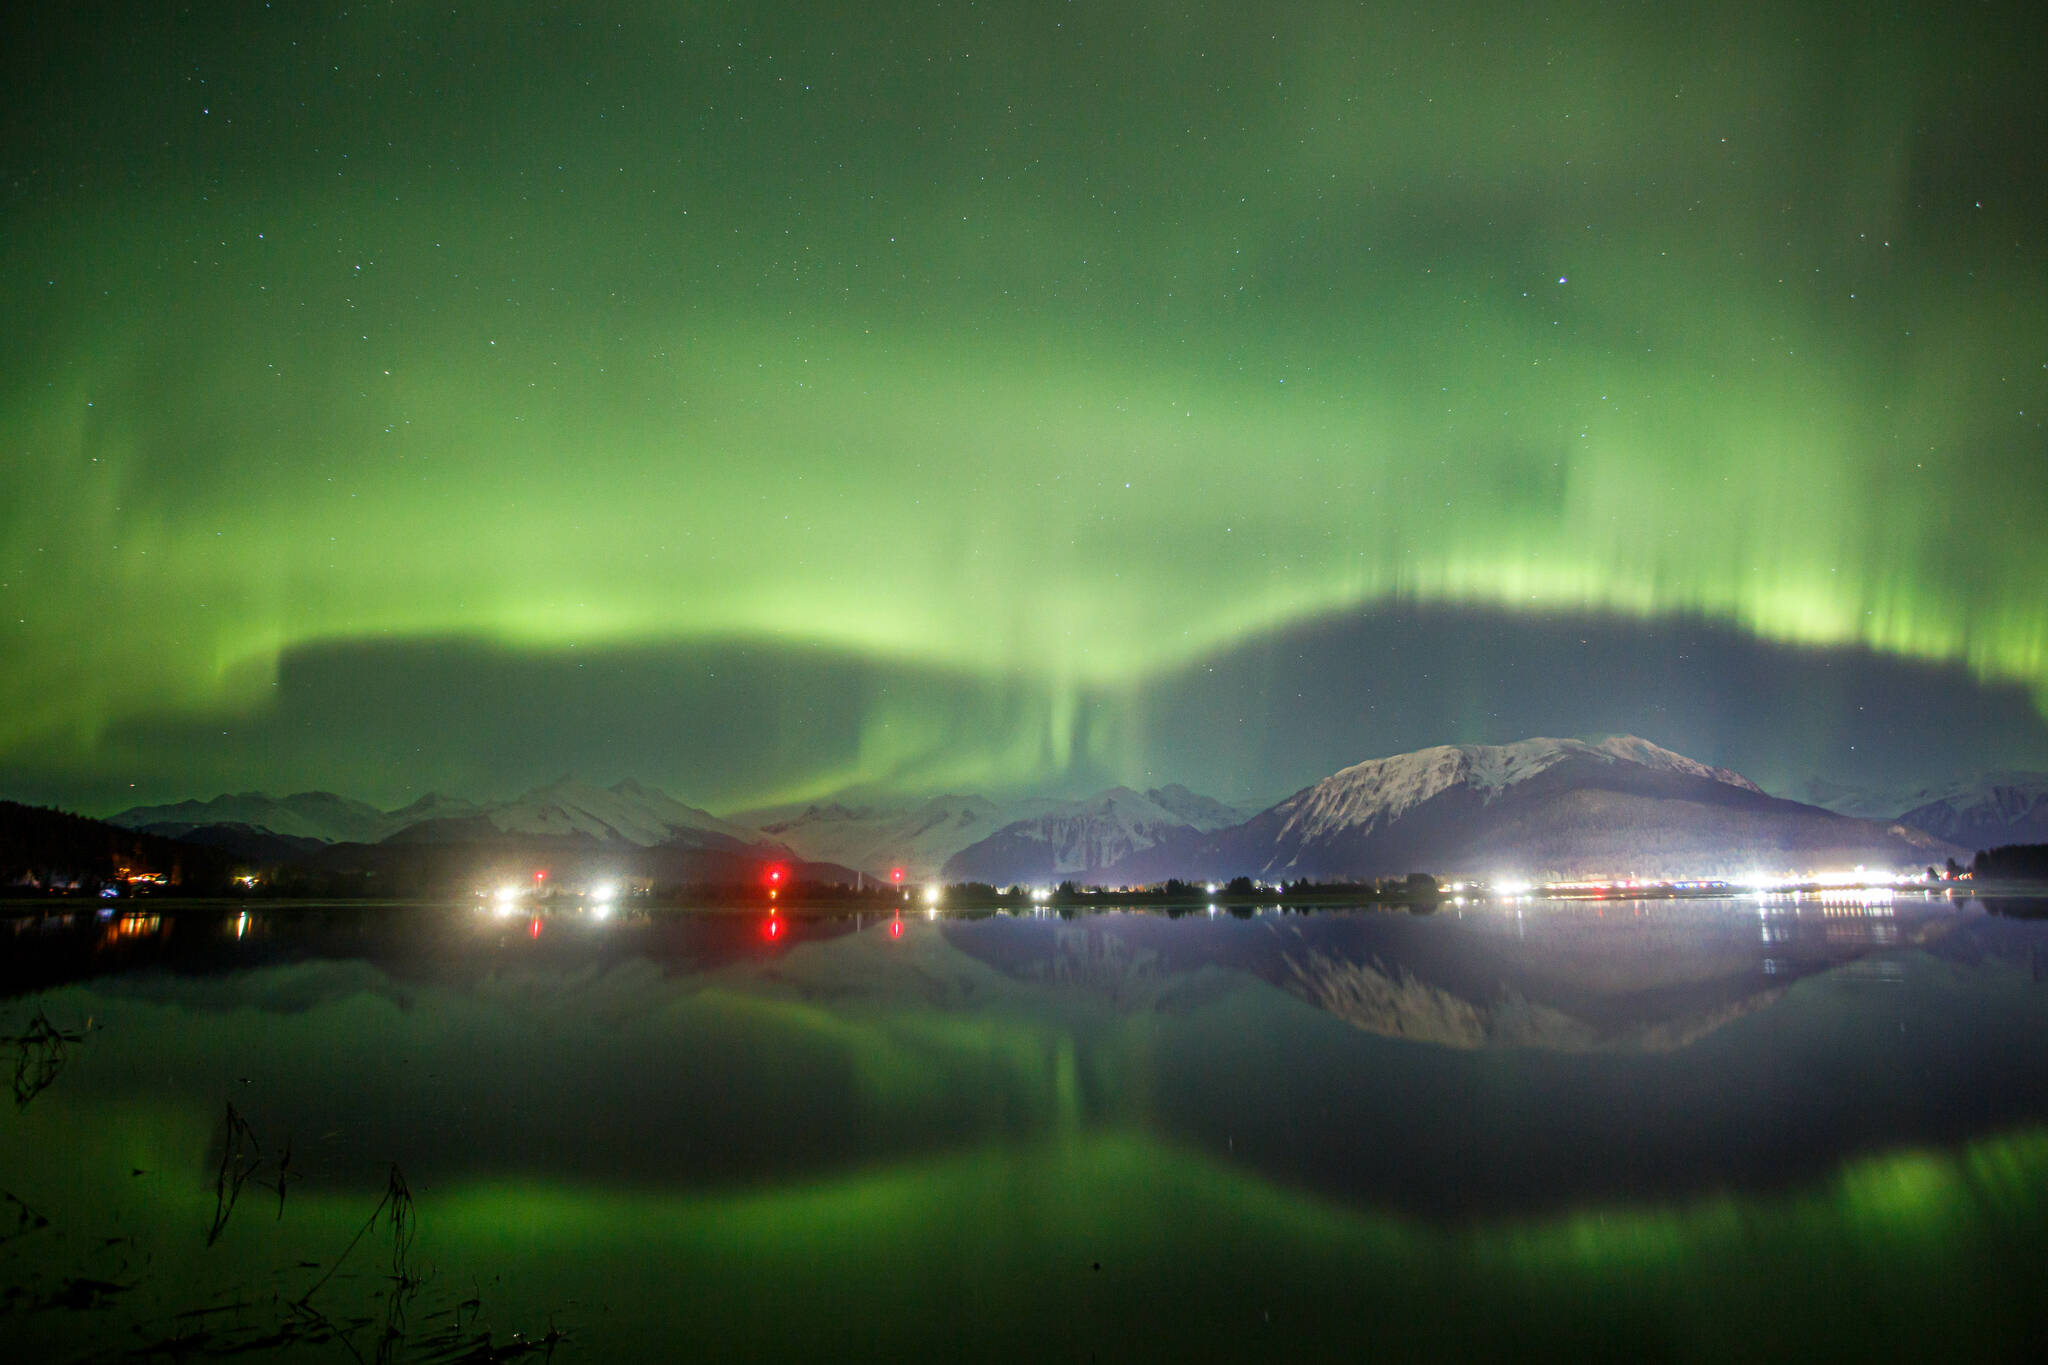 Northern lights over the Mendenhall Valley early on Feb. 21. (Courtesy Photo / Jack Beedle)